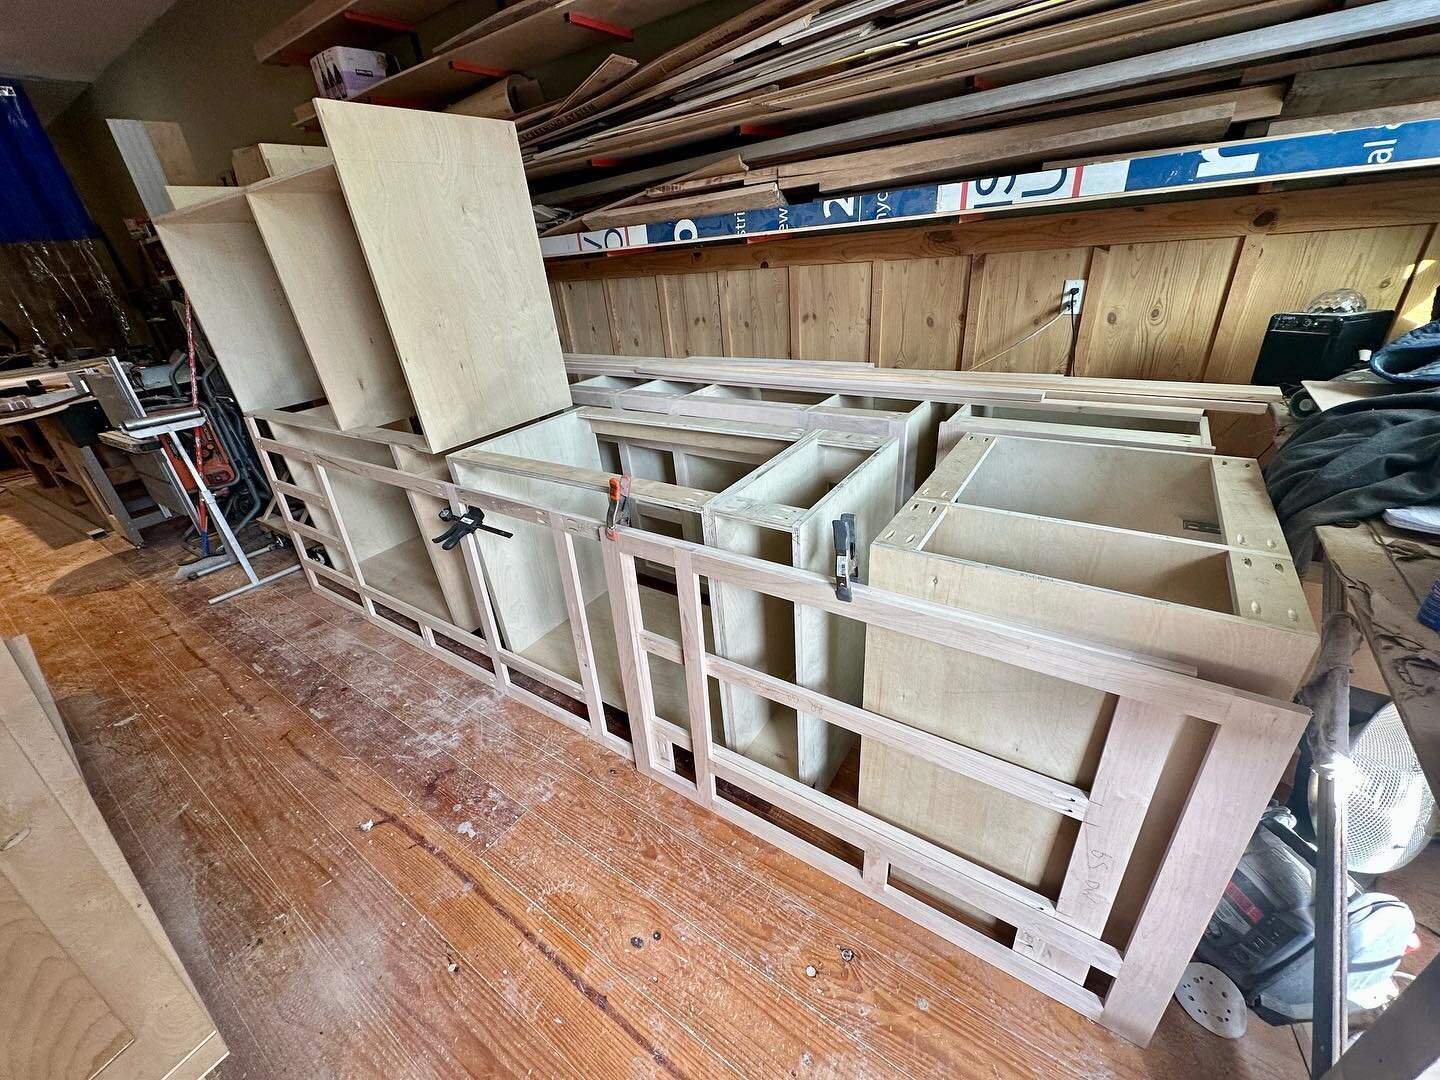 These boxes are starting to stack up!! Fabricating a whole house worth of living room, kitchen, and bathroom cabinetry for a historic home remodel. This is the second batch, one more to go, and then we will install to paint in place.

#customcabinets